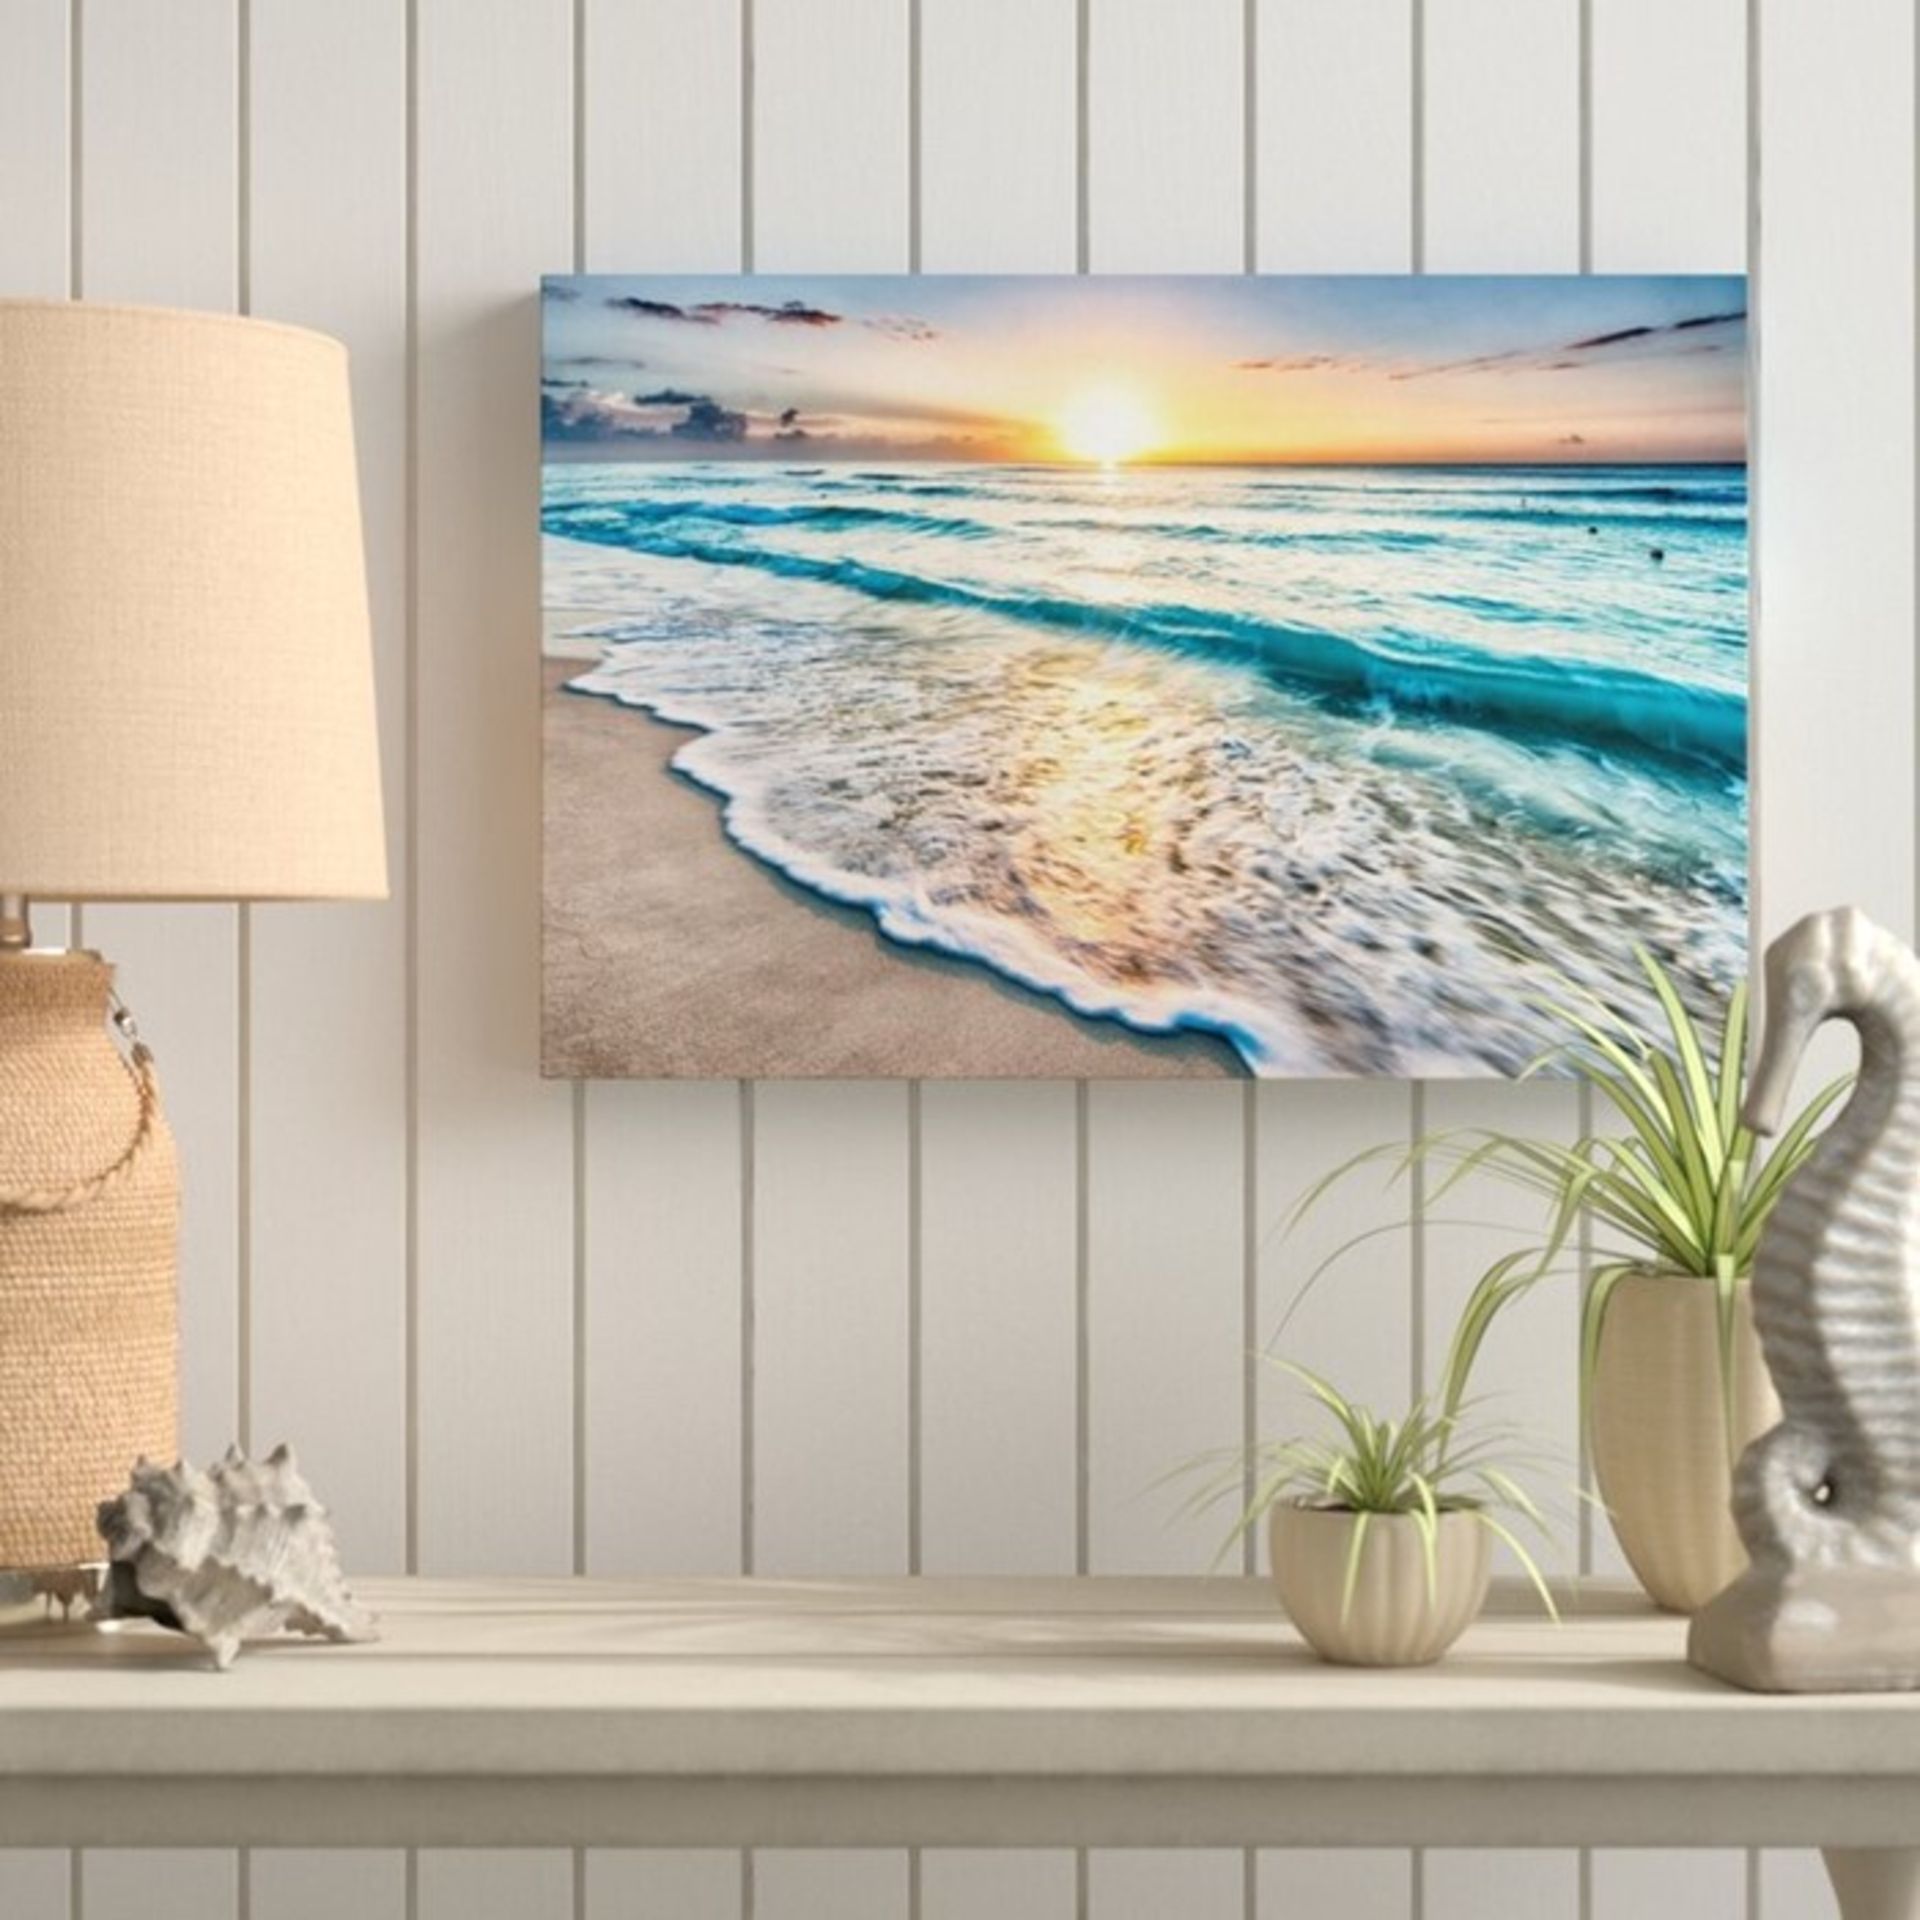 East Urban Home,Sea at Sunset Graphic Art on CanvasRRP -£42.99 (15266/13 -EXXP1873)